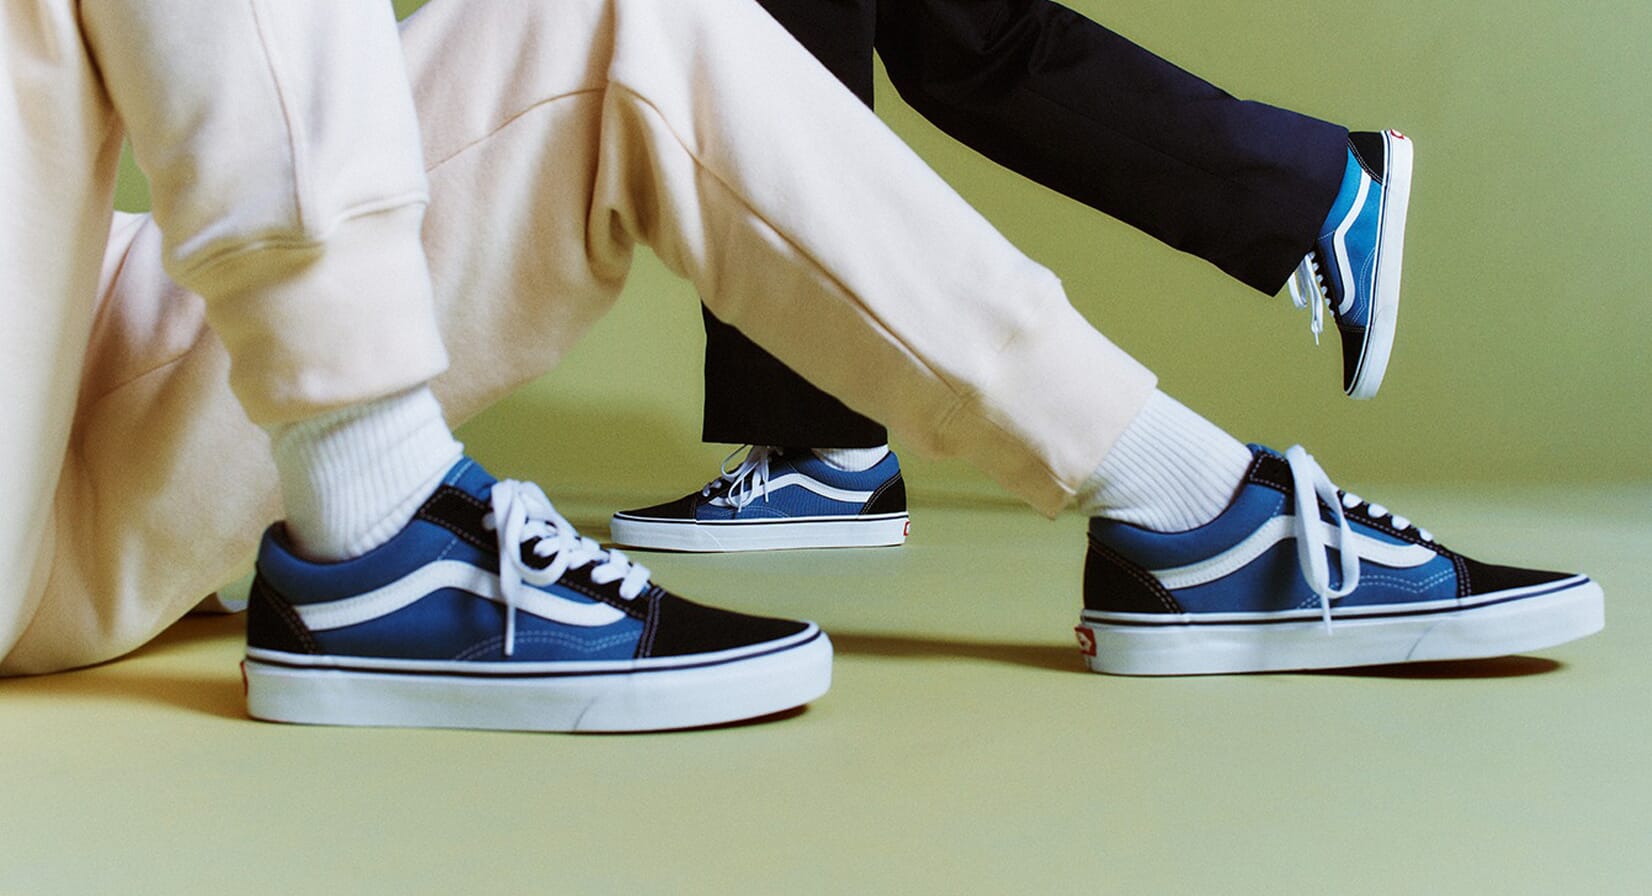 Vans sizing guide 2023: Find your perfect sneakers fit | OPUMO Magazine